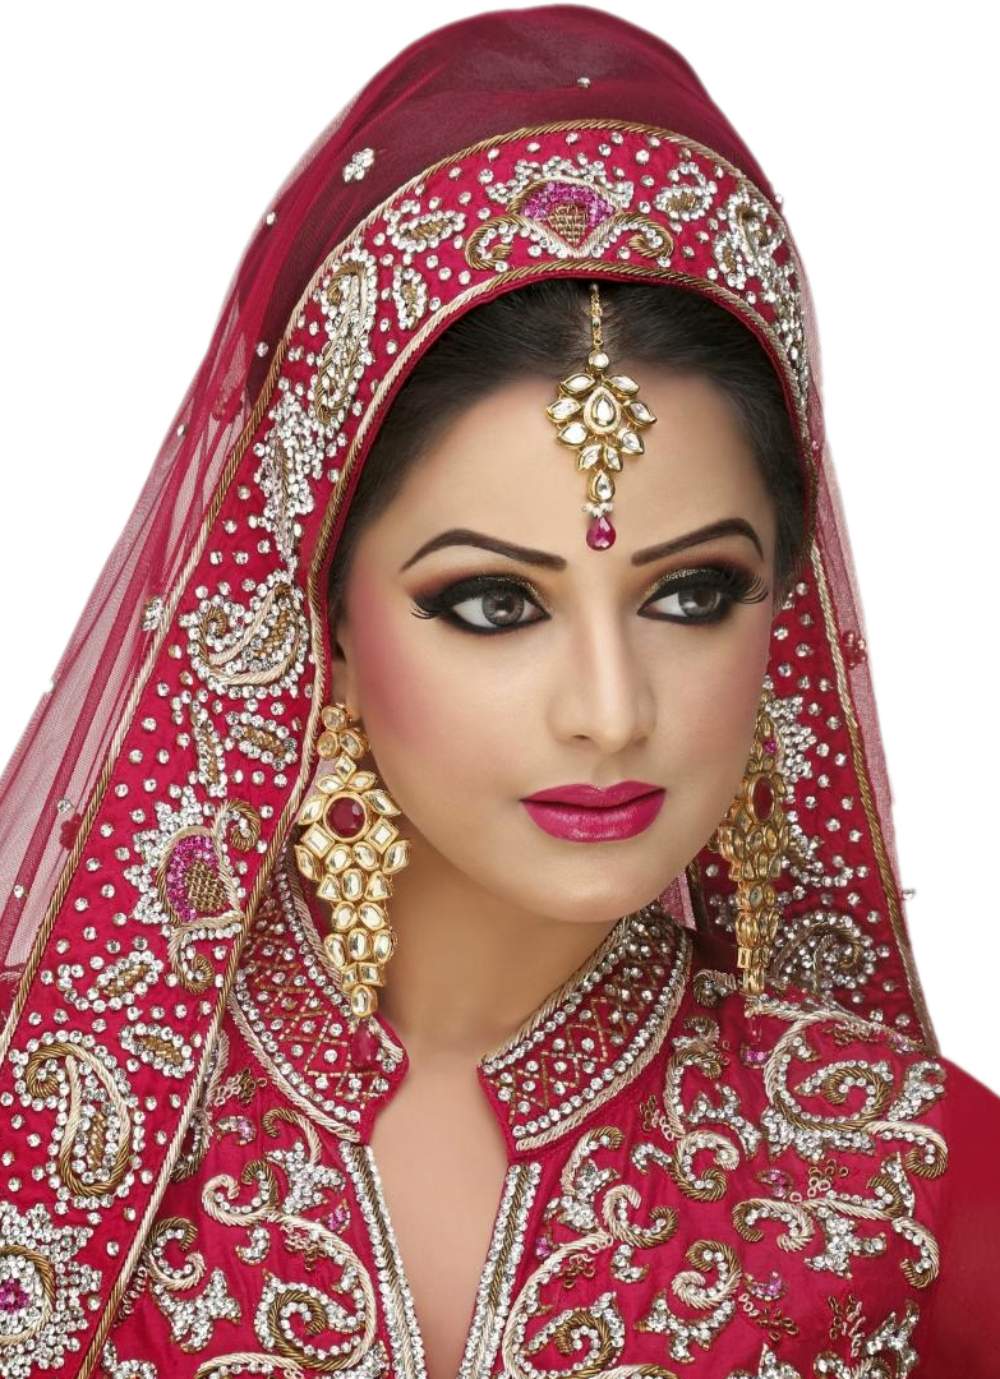 Makeup by Tanyya - Makeup Artist - Rohini - Weddingwire.in